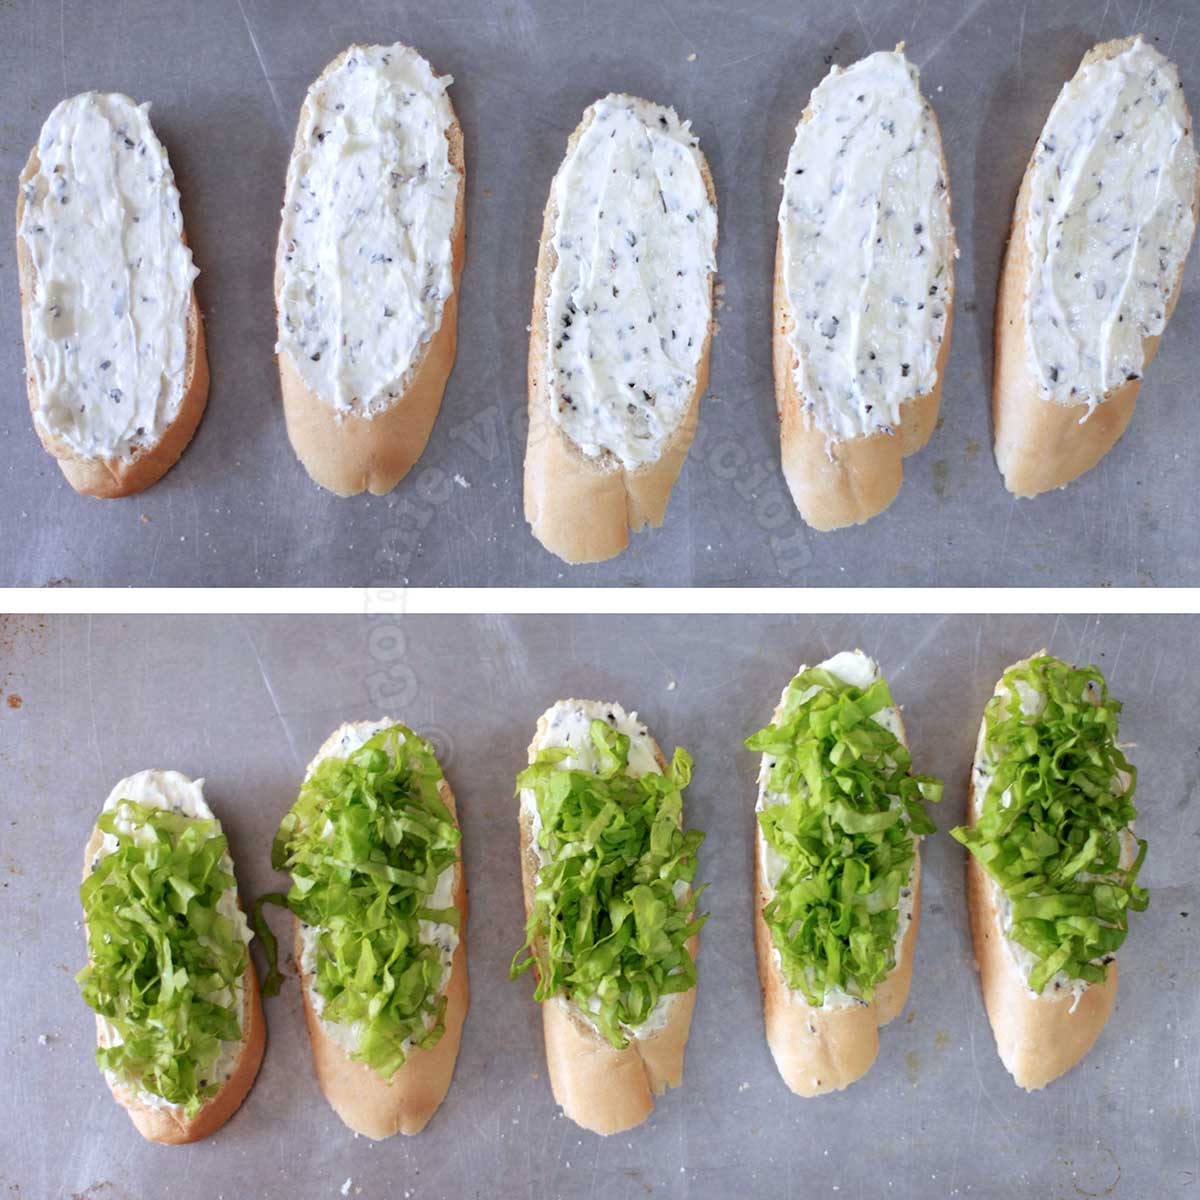 Baguette slices spread with cream cheese and topped with lettuce